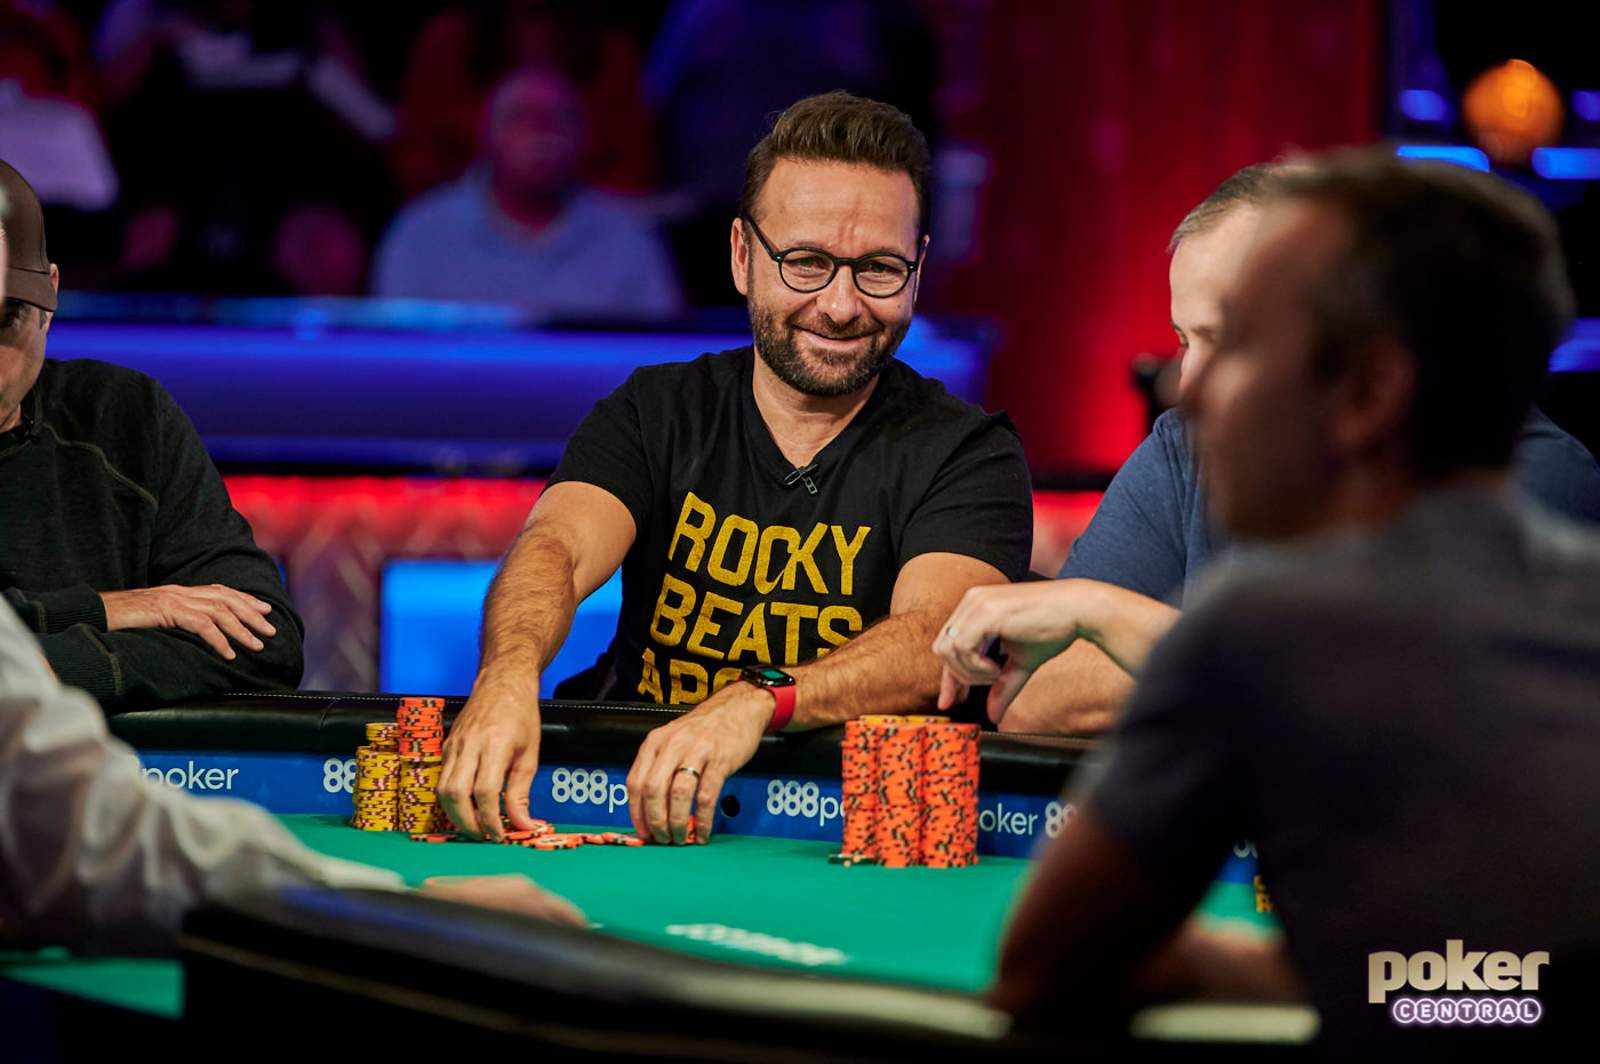 Daniel Negreanu Wins 2019 World Series of Poker Player of the Year